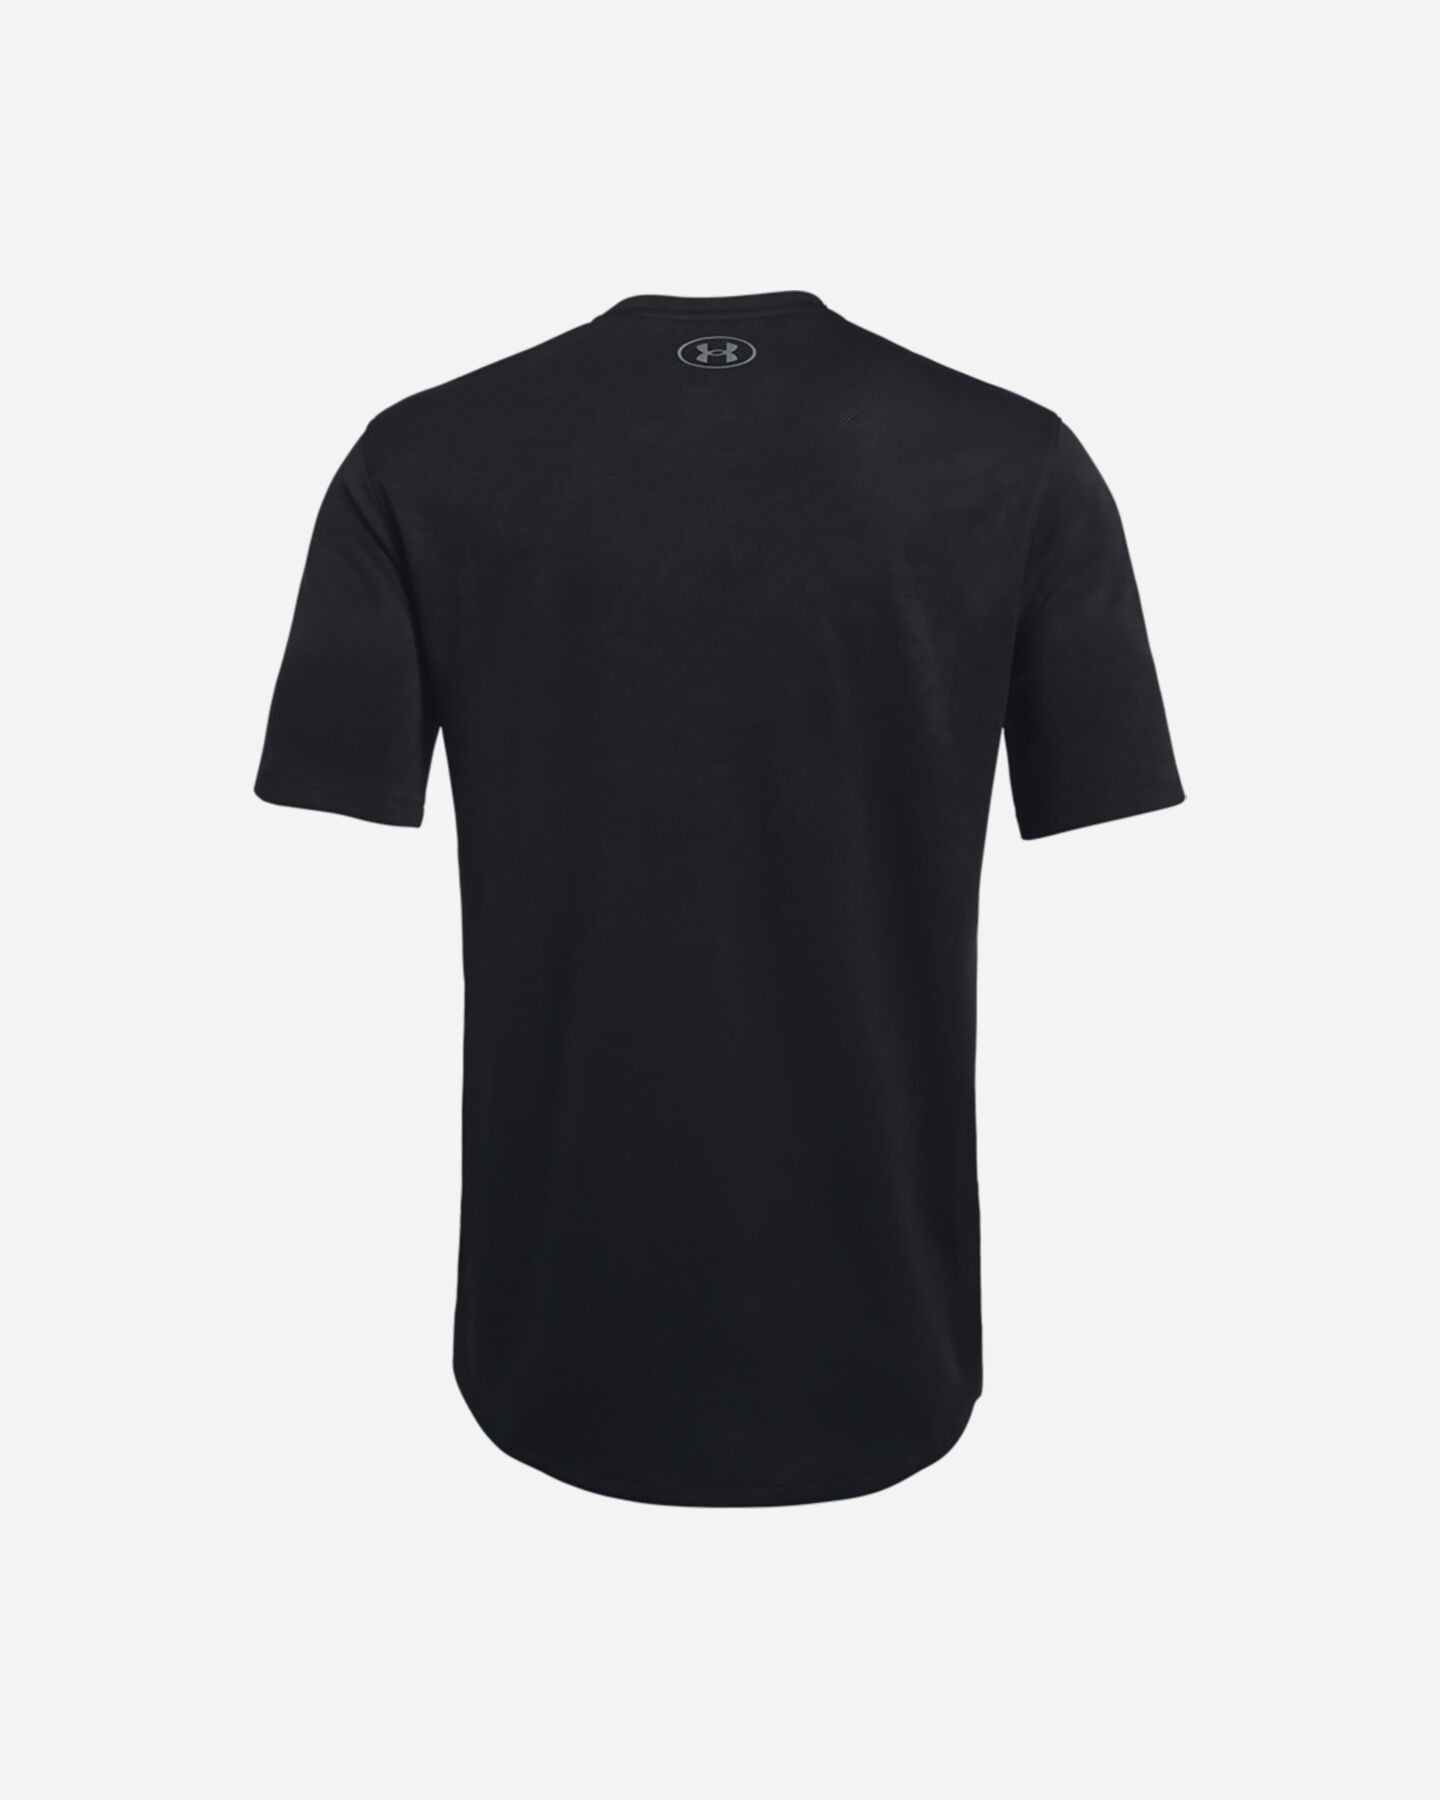  T-Shirt training UNDER ARMOUR TRAINING VENT M S5287257|0001|SM scatto 1